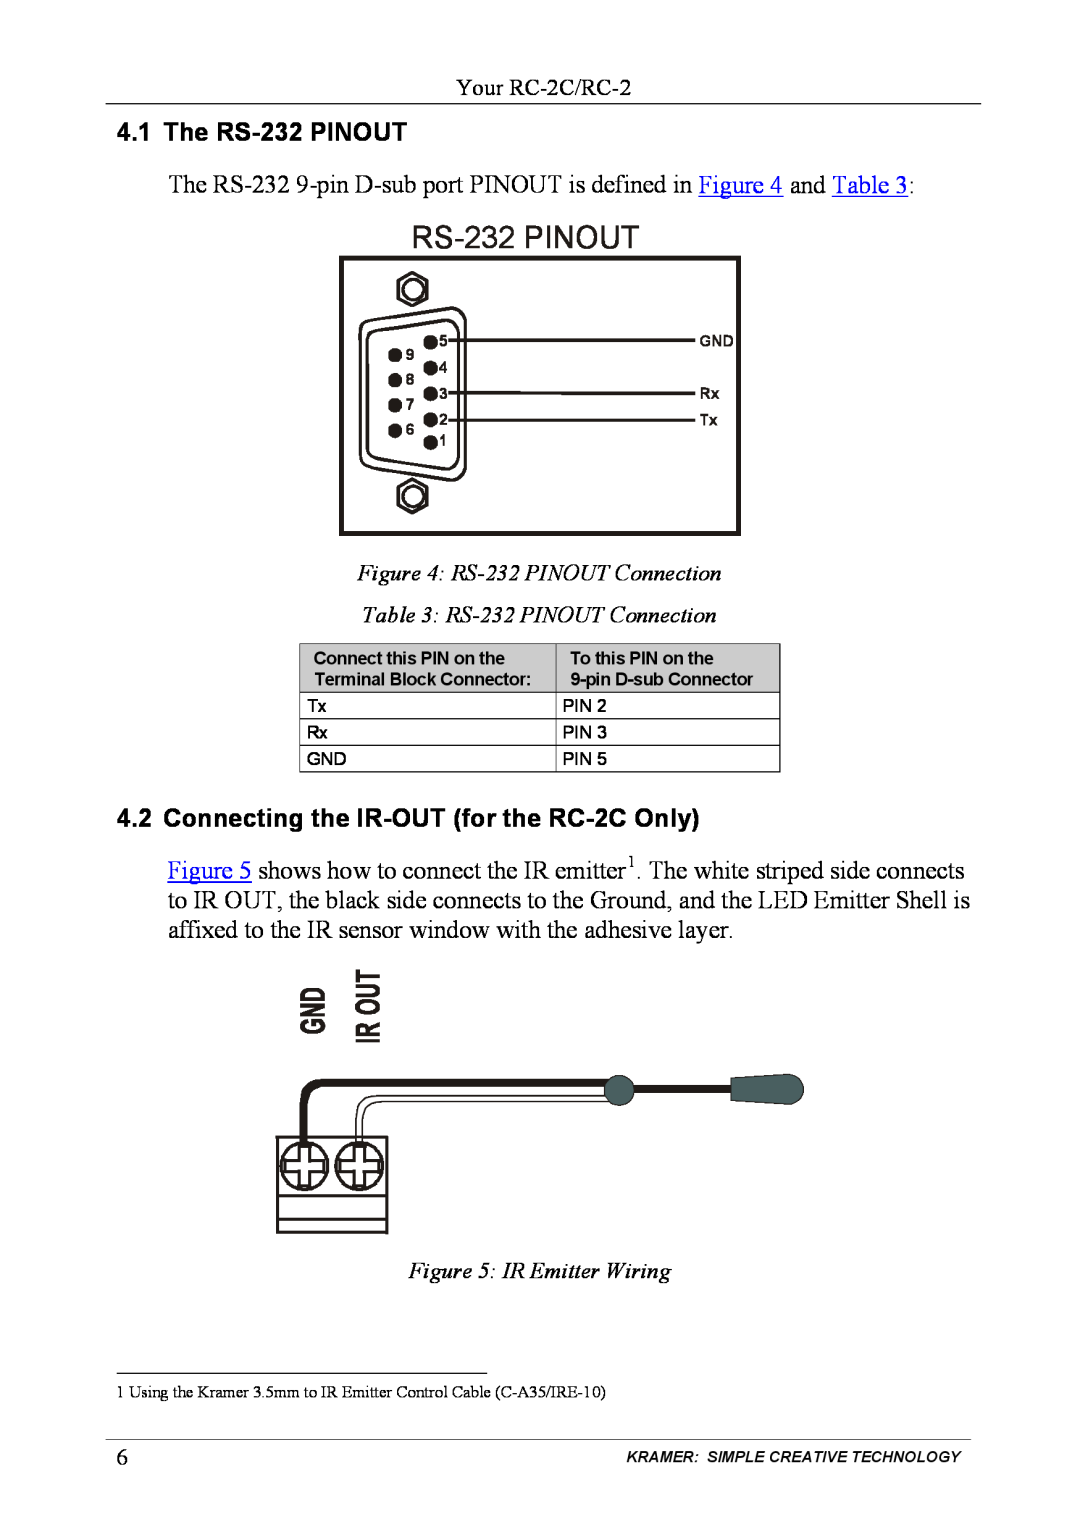 Kramer Electronics user manual The RS-232PINOUT, Connecting the IR-OUTfor the RC-2COnly 